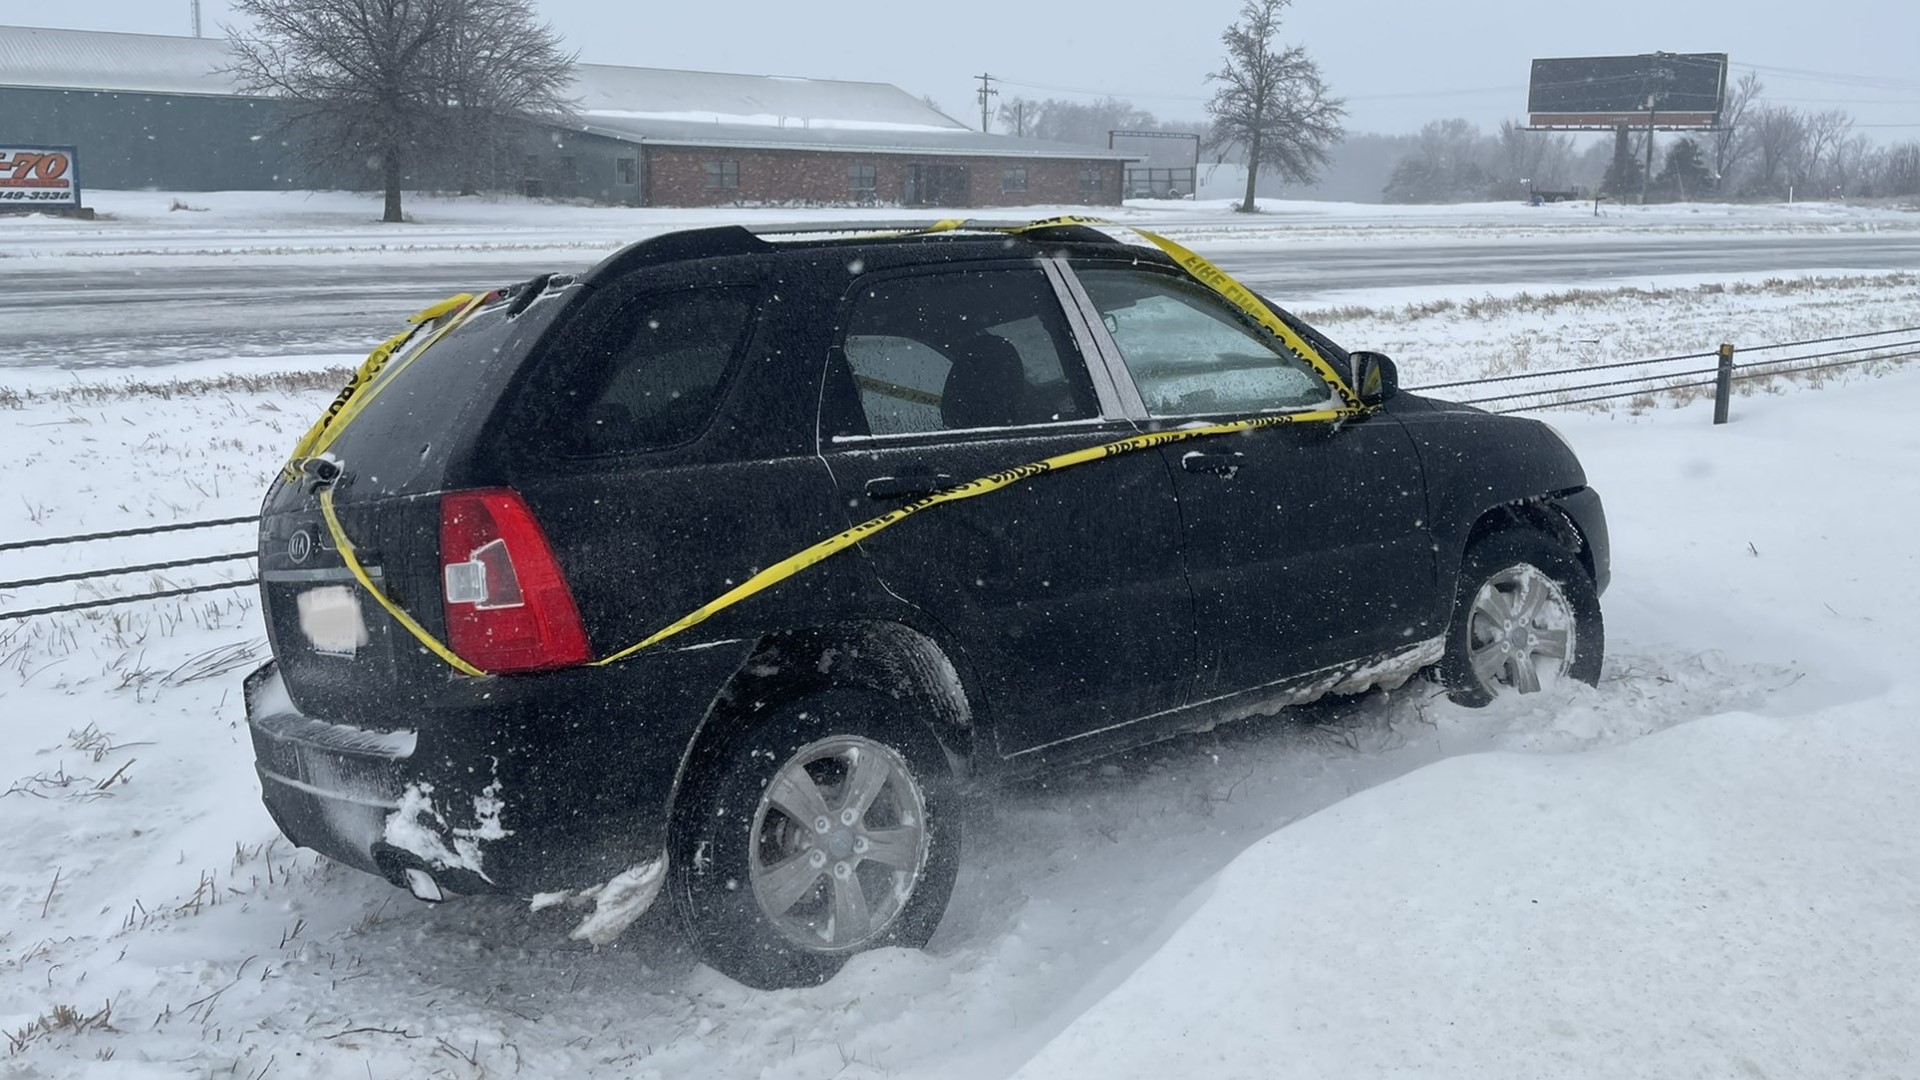 Wintry weather can lead to rough road conditions. If you see a car trapped on the side of the road, check to see if it has caution tape or an orange sticker on it.